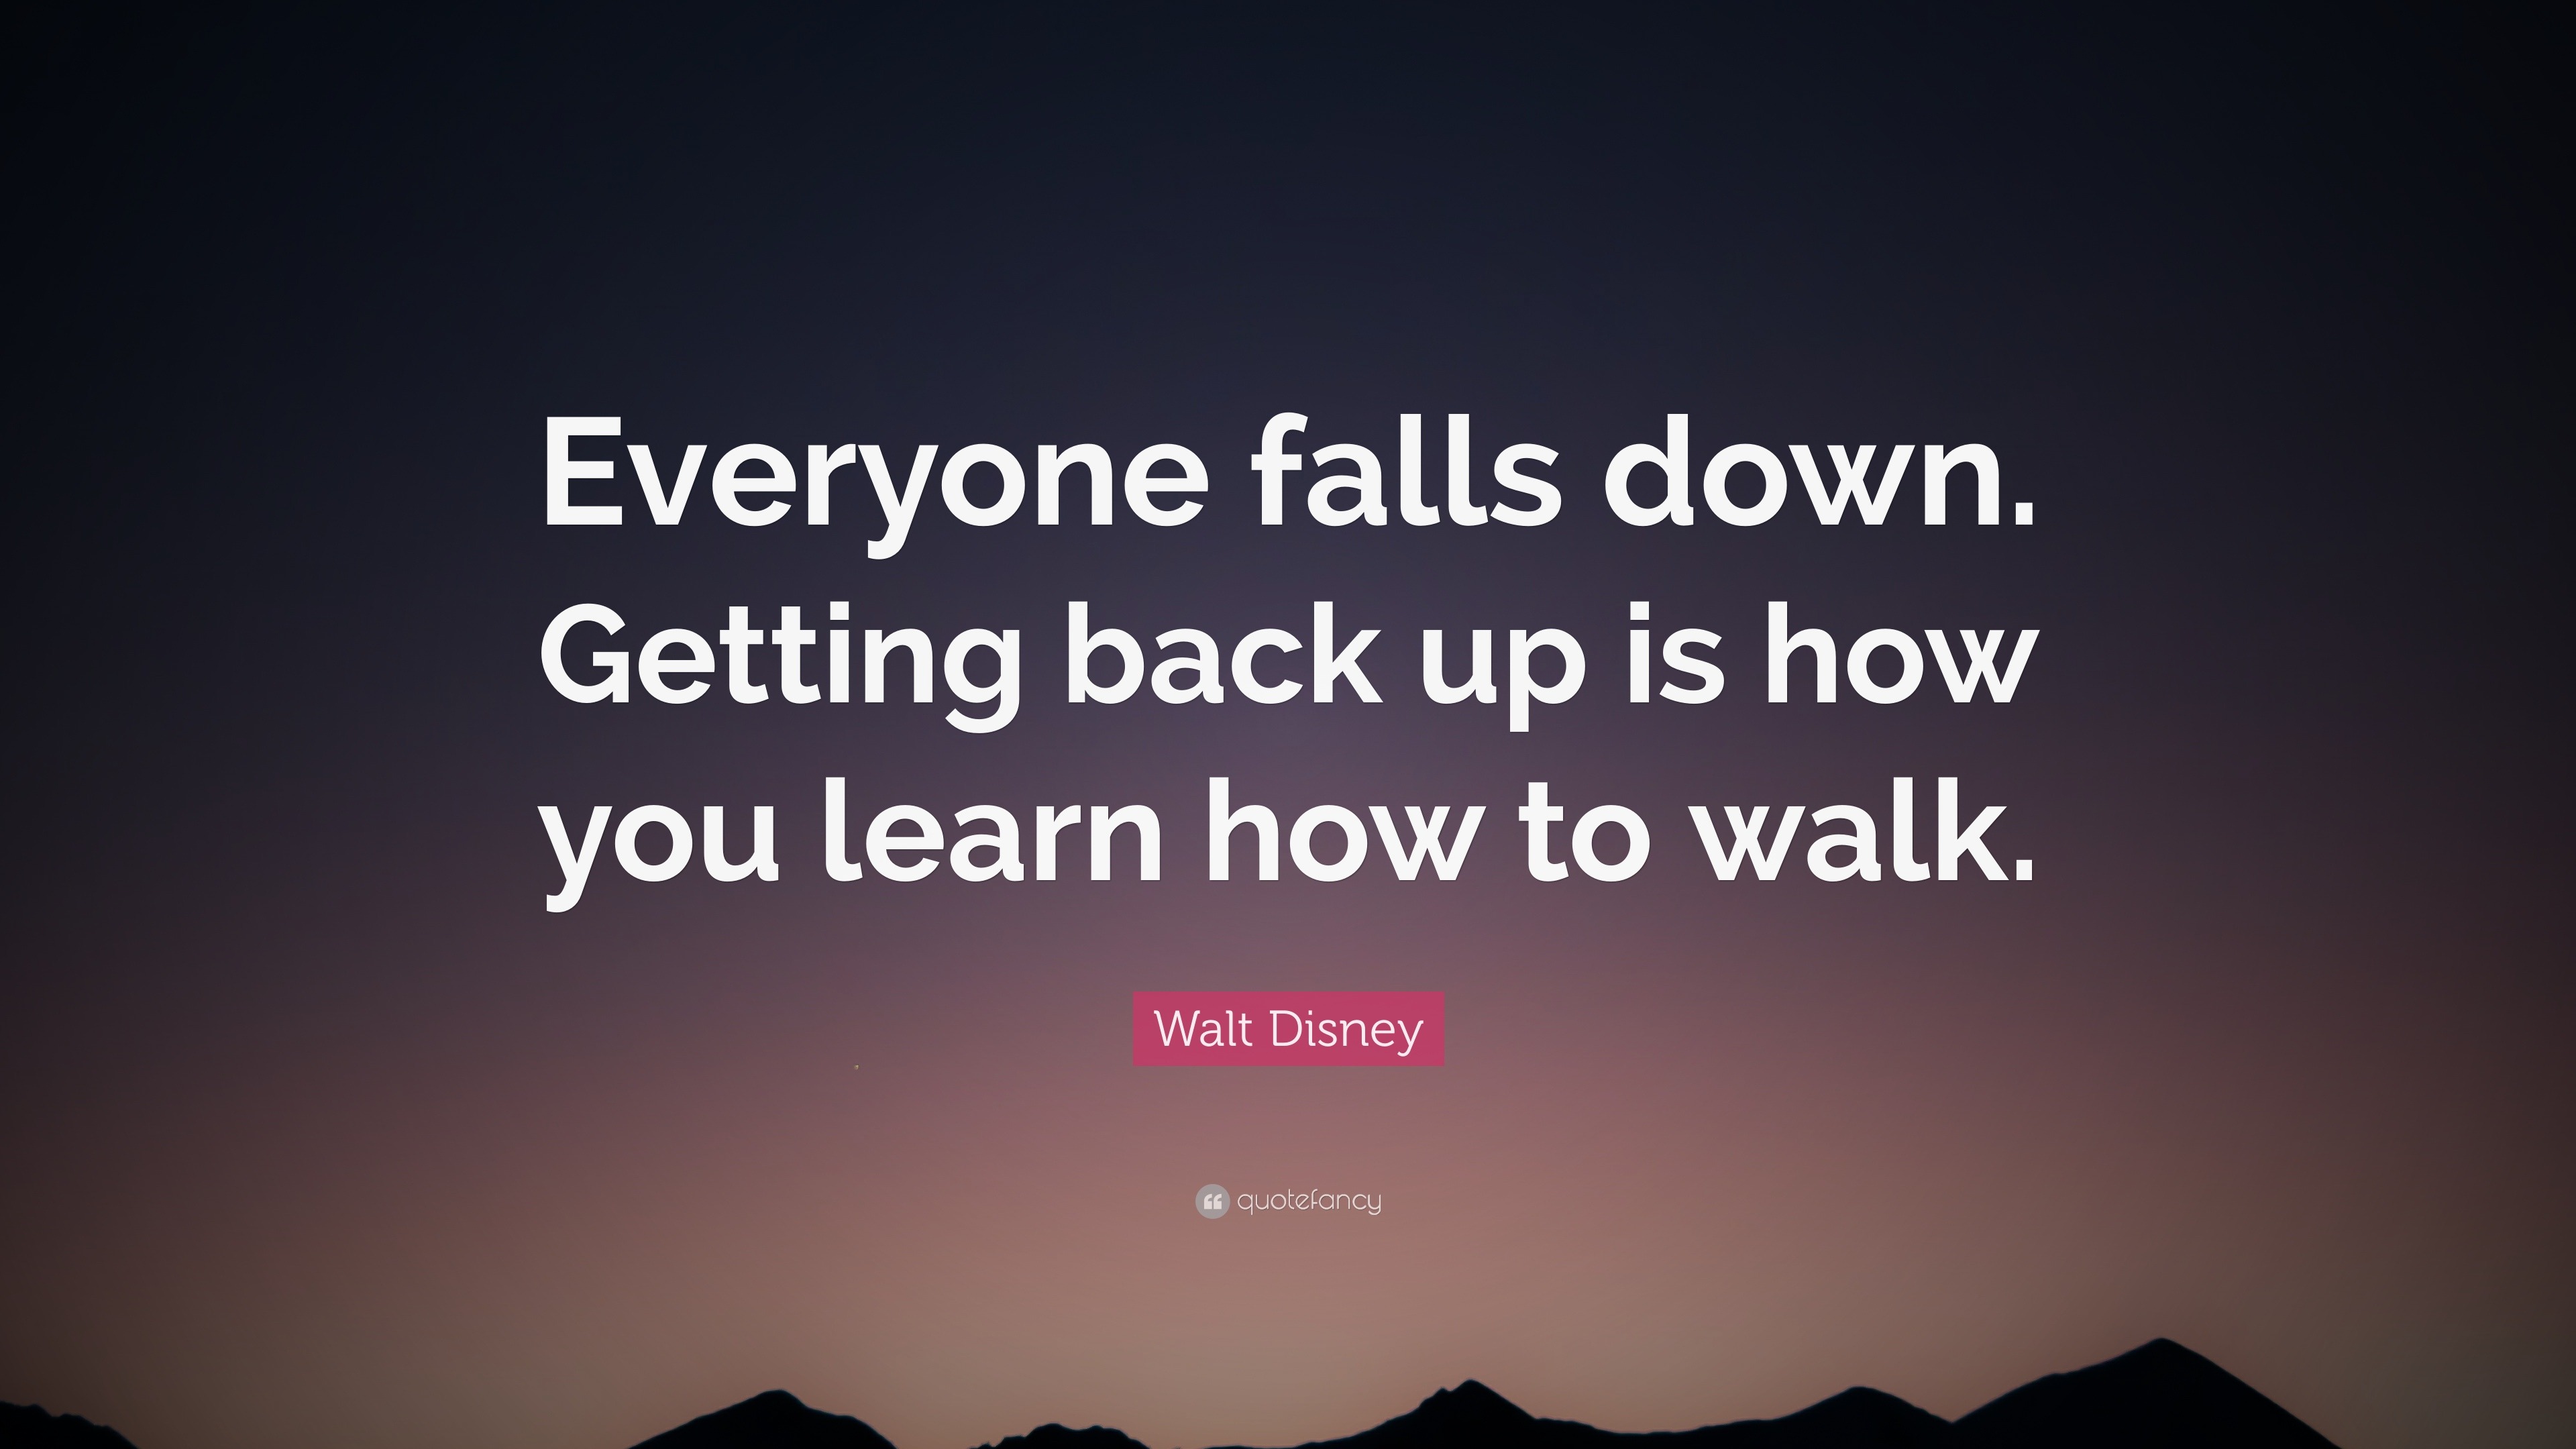 Walt Disney Quote: “Everyone falls down. Getting back up is how you